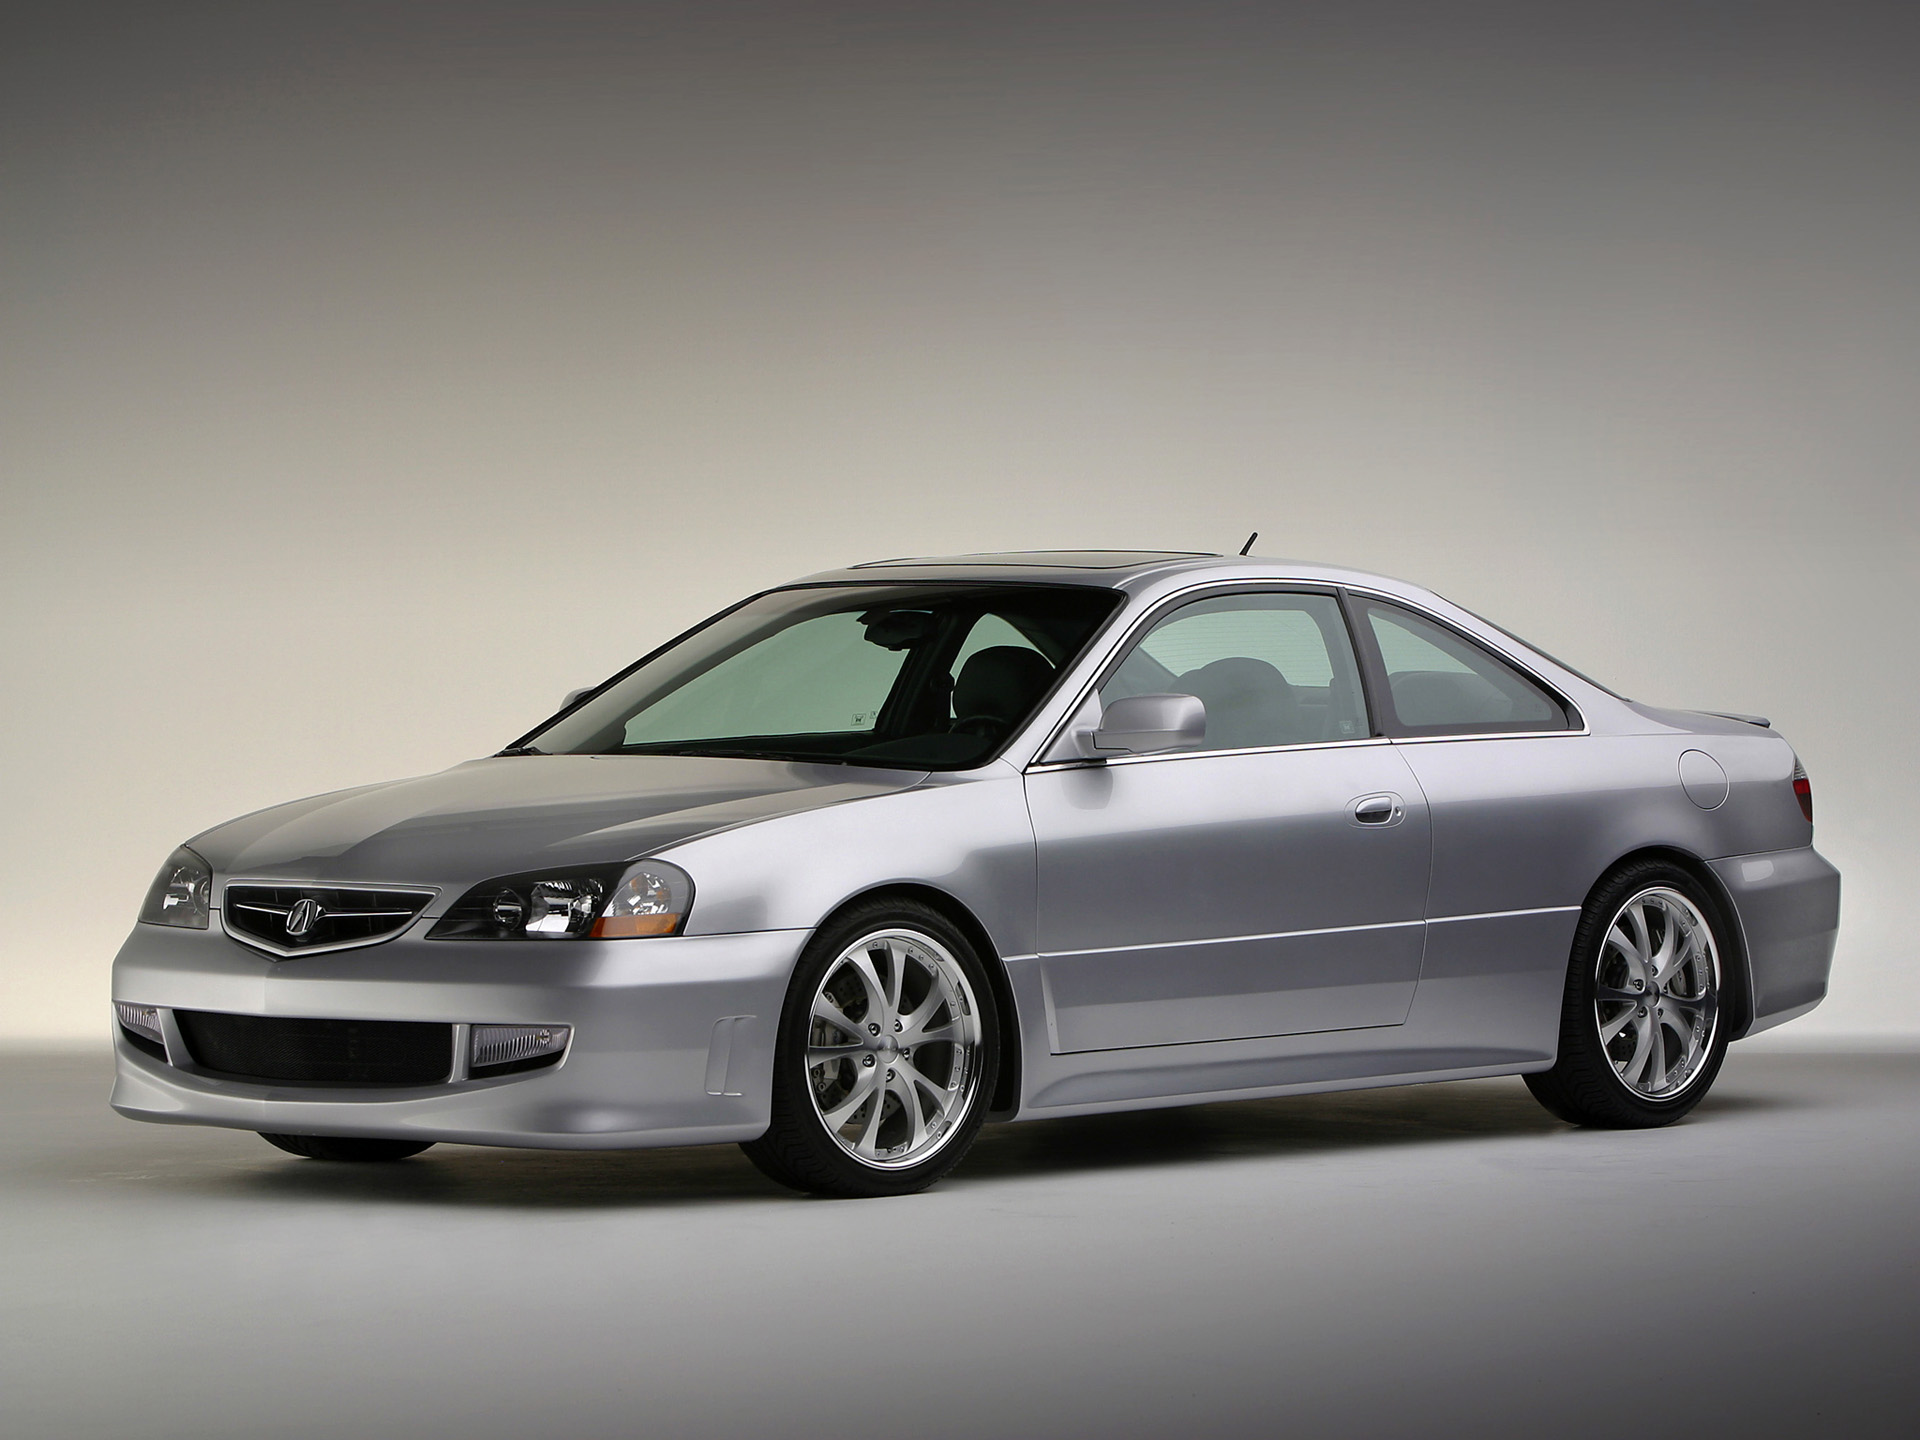 2002 Acura 3.2 CL Type-S Wallpapers | SuperCars.net